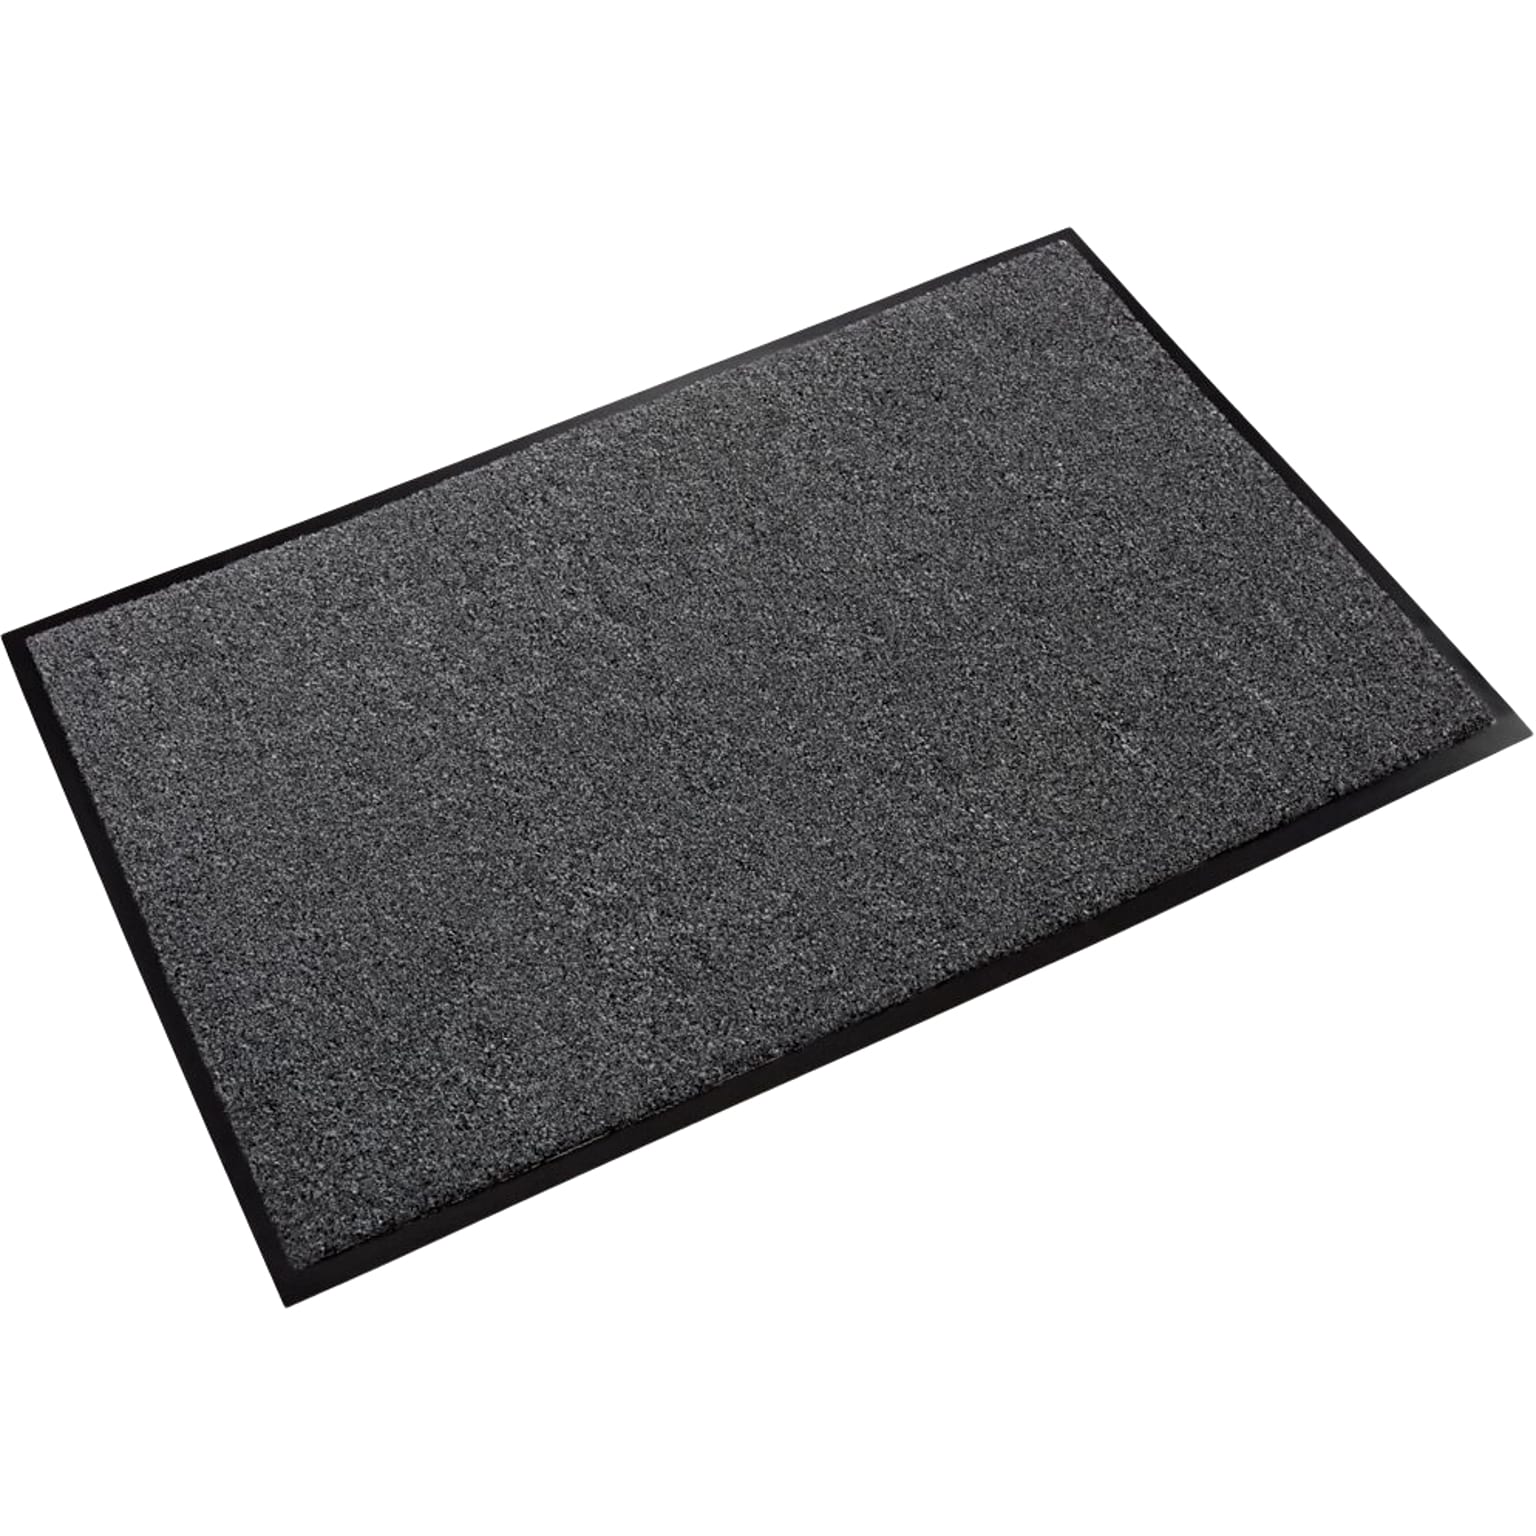 Crown Mats Rely-On Olefin Wiper Mat, 48x72, Charcoal (GS 0046CH)